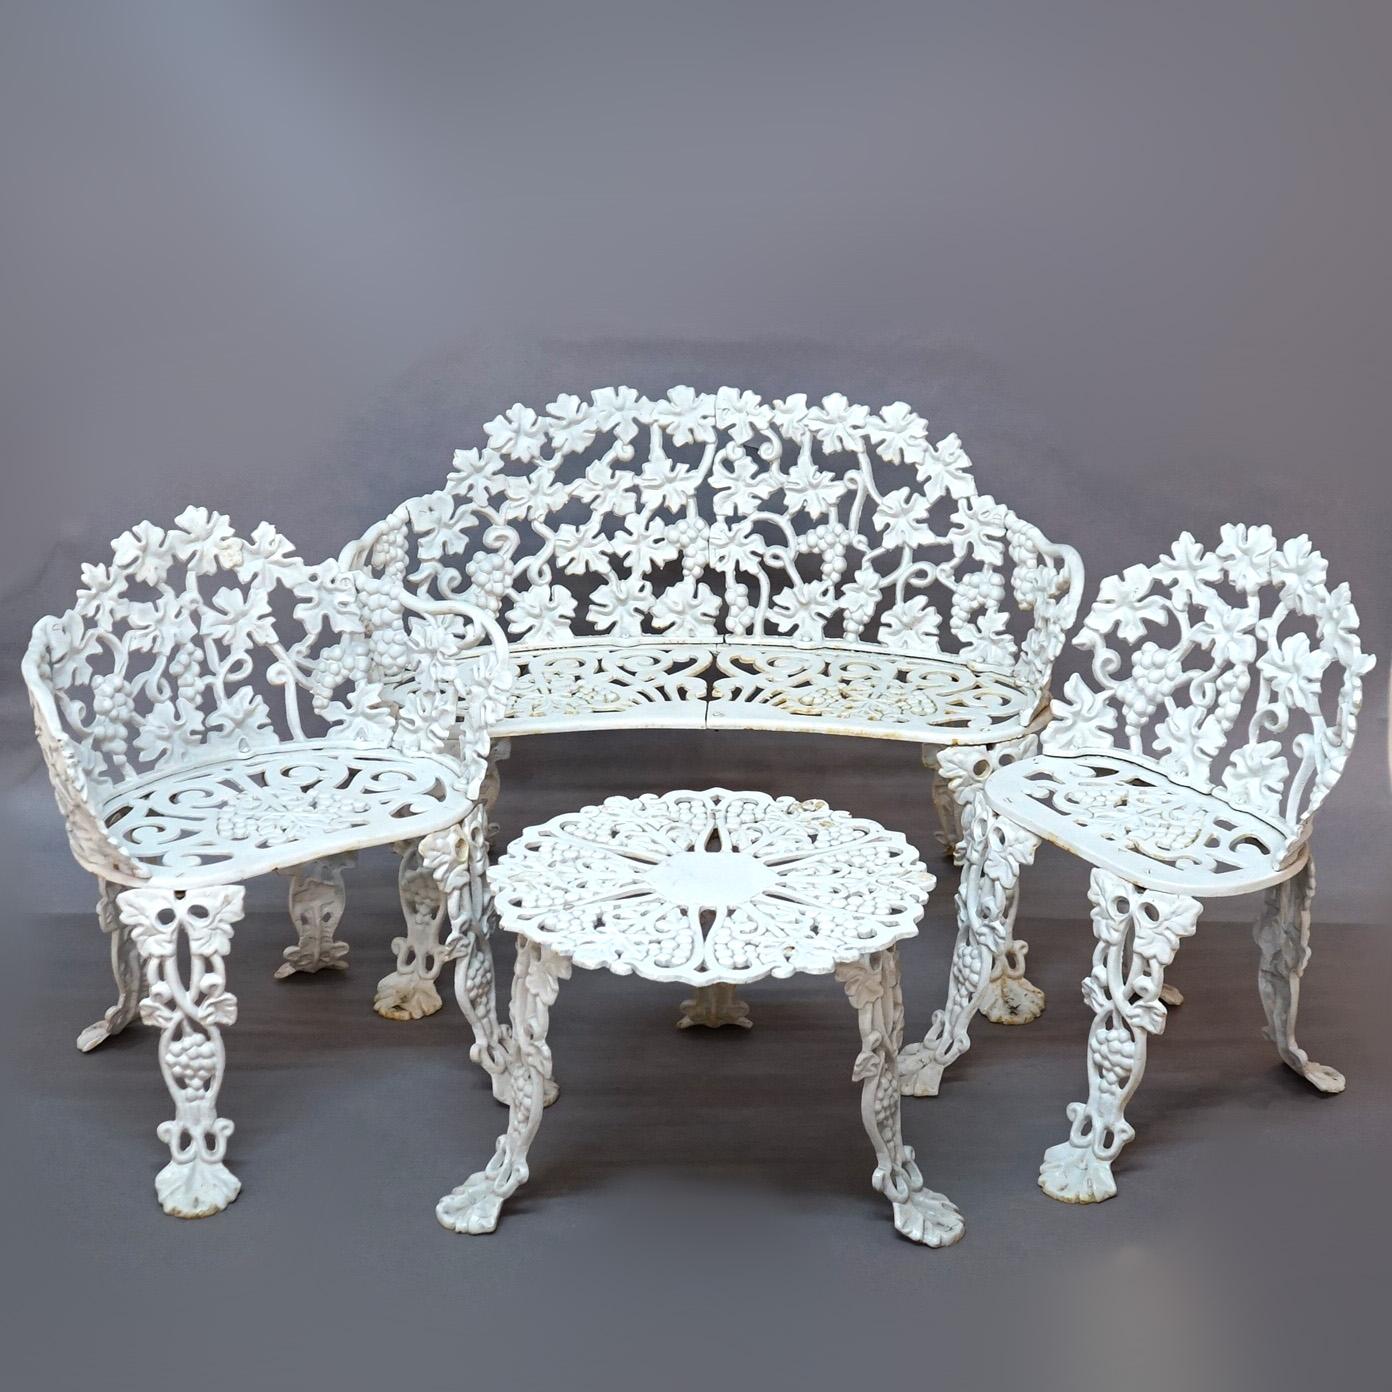 ***Ask About Reduced In-House Shipping Rates - Reliable Service & Fully Insured***
White Painted Cast Iron Grape & Leaf Four-Piece Garden Seating Set; Settee, Arm Chair, Side Chair and Center Table; 20thC

Measures- Small Table: 14.25''H x 23.5''W x